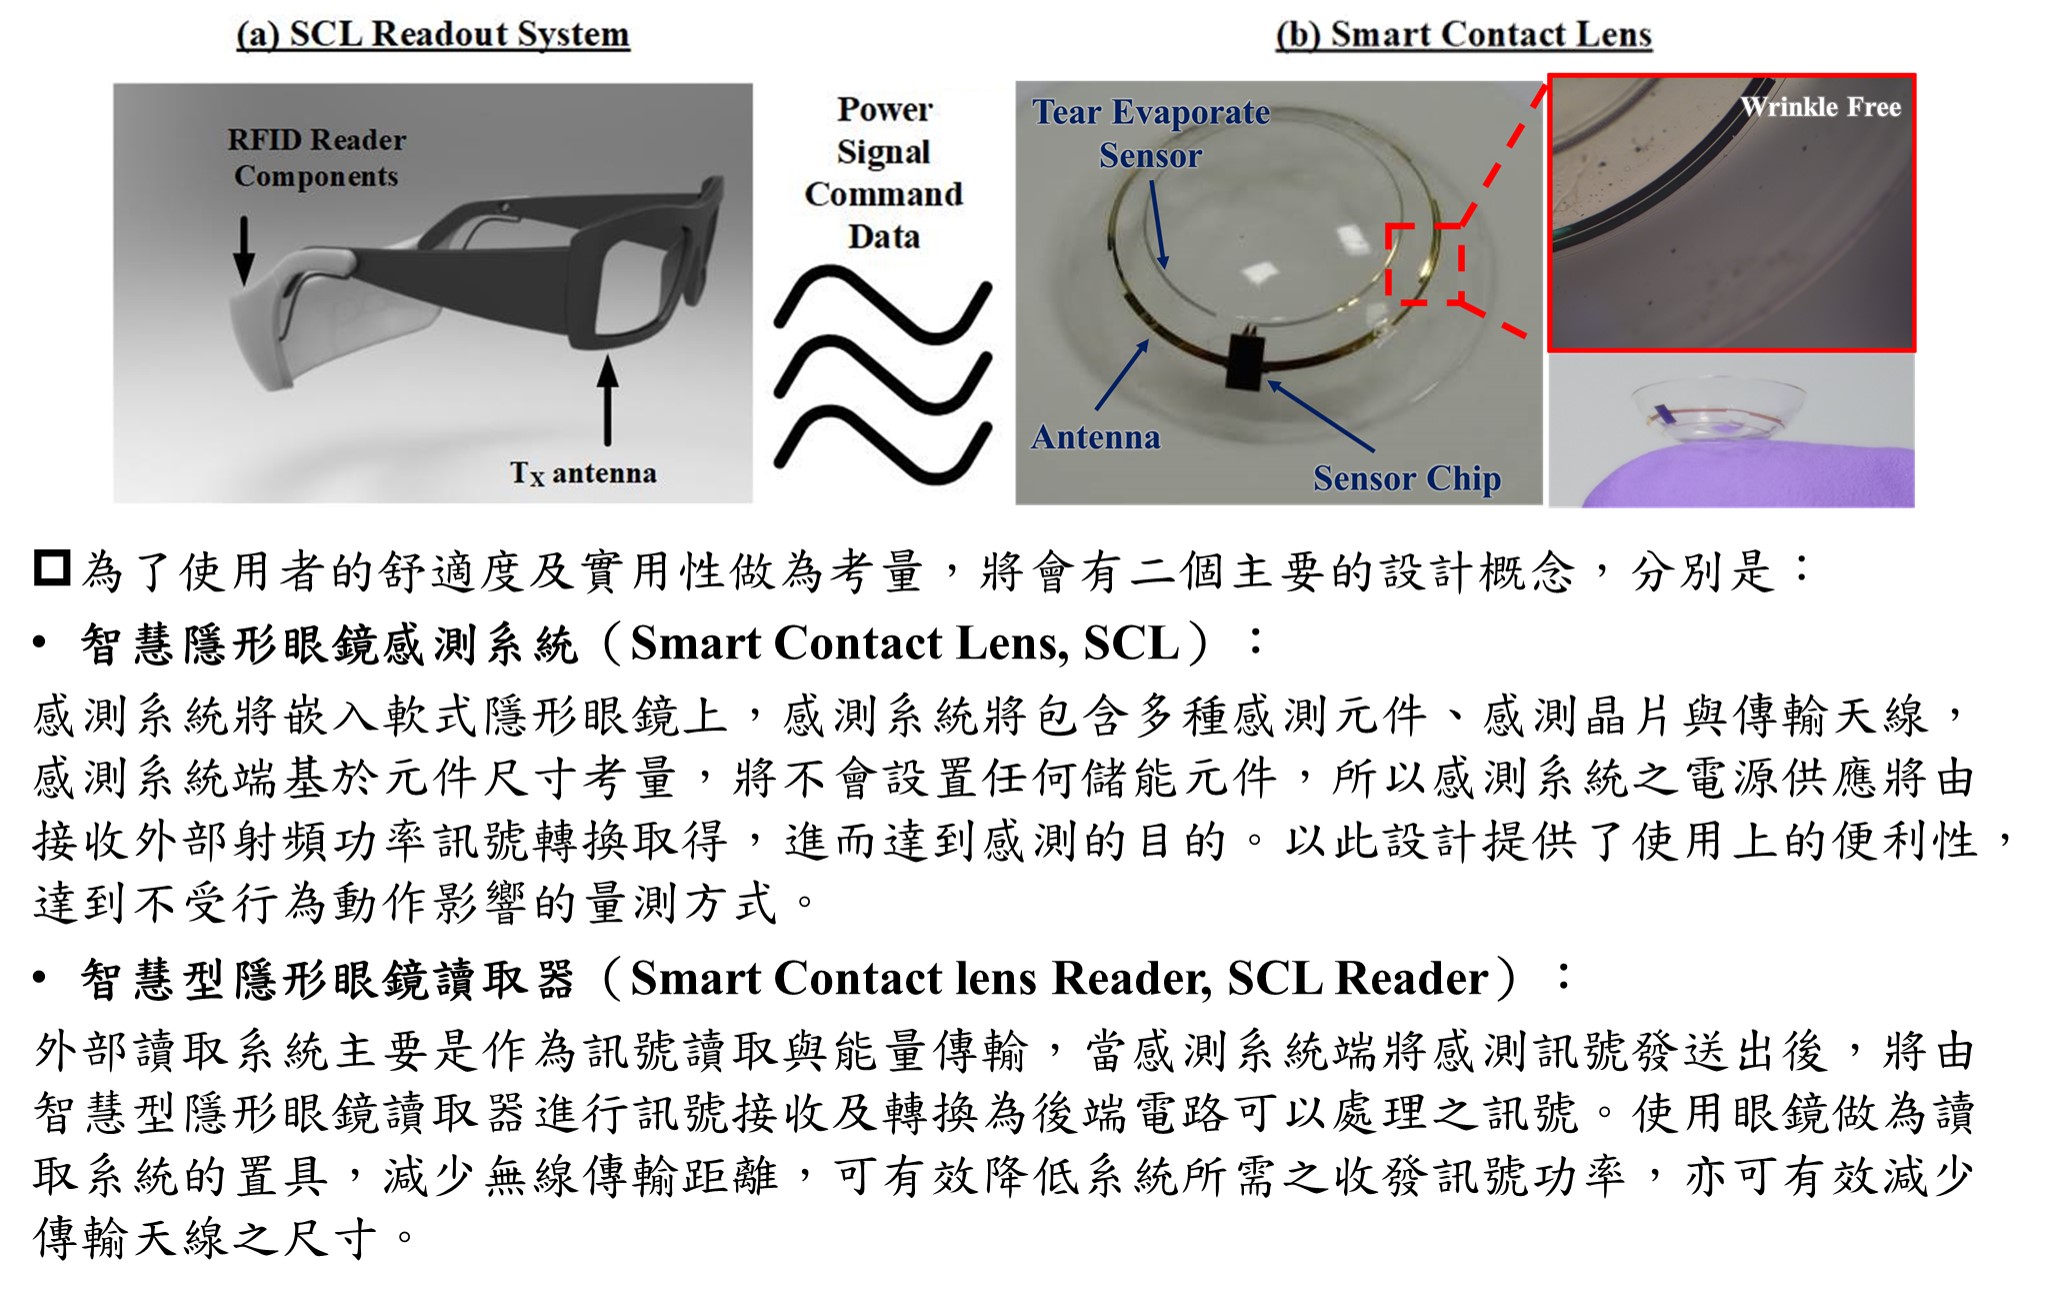 The DevelopmentClinical Research of Smart Contact Lens System for Dry Eye Syndrome Diagnosis